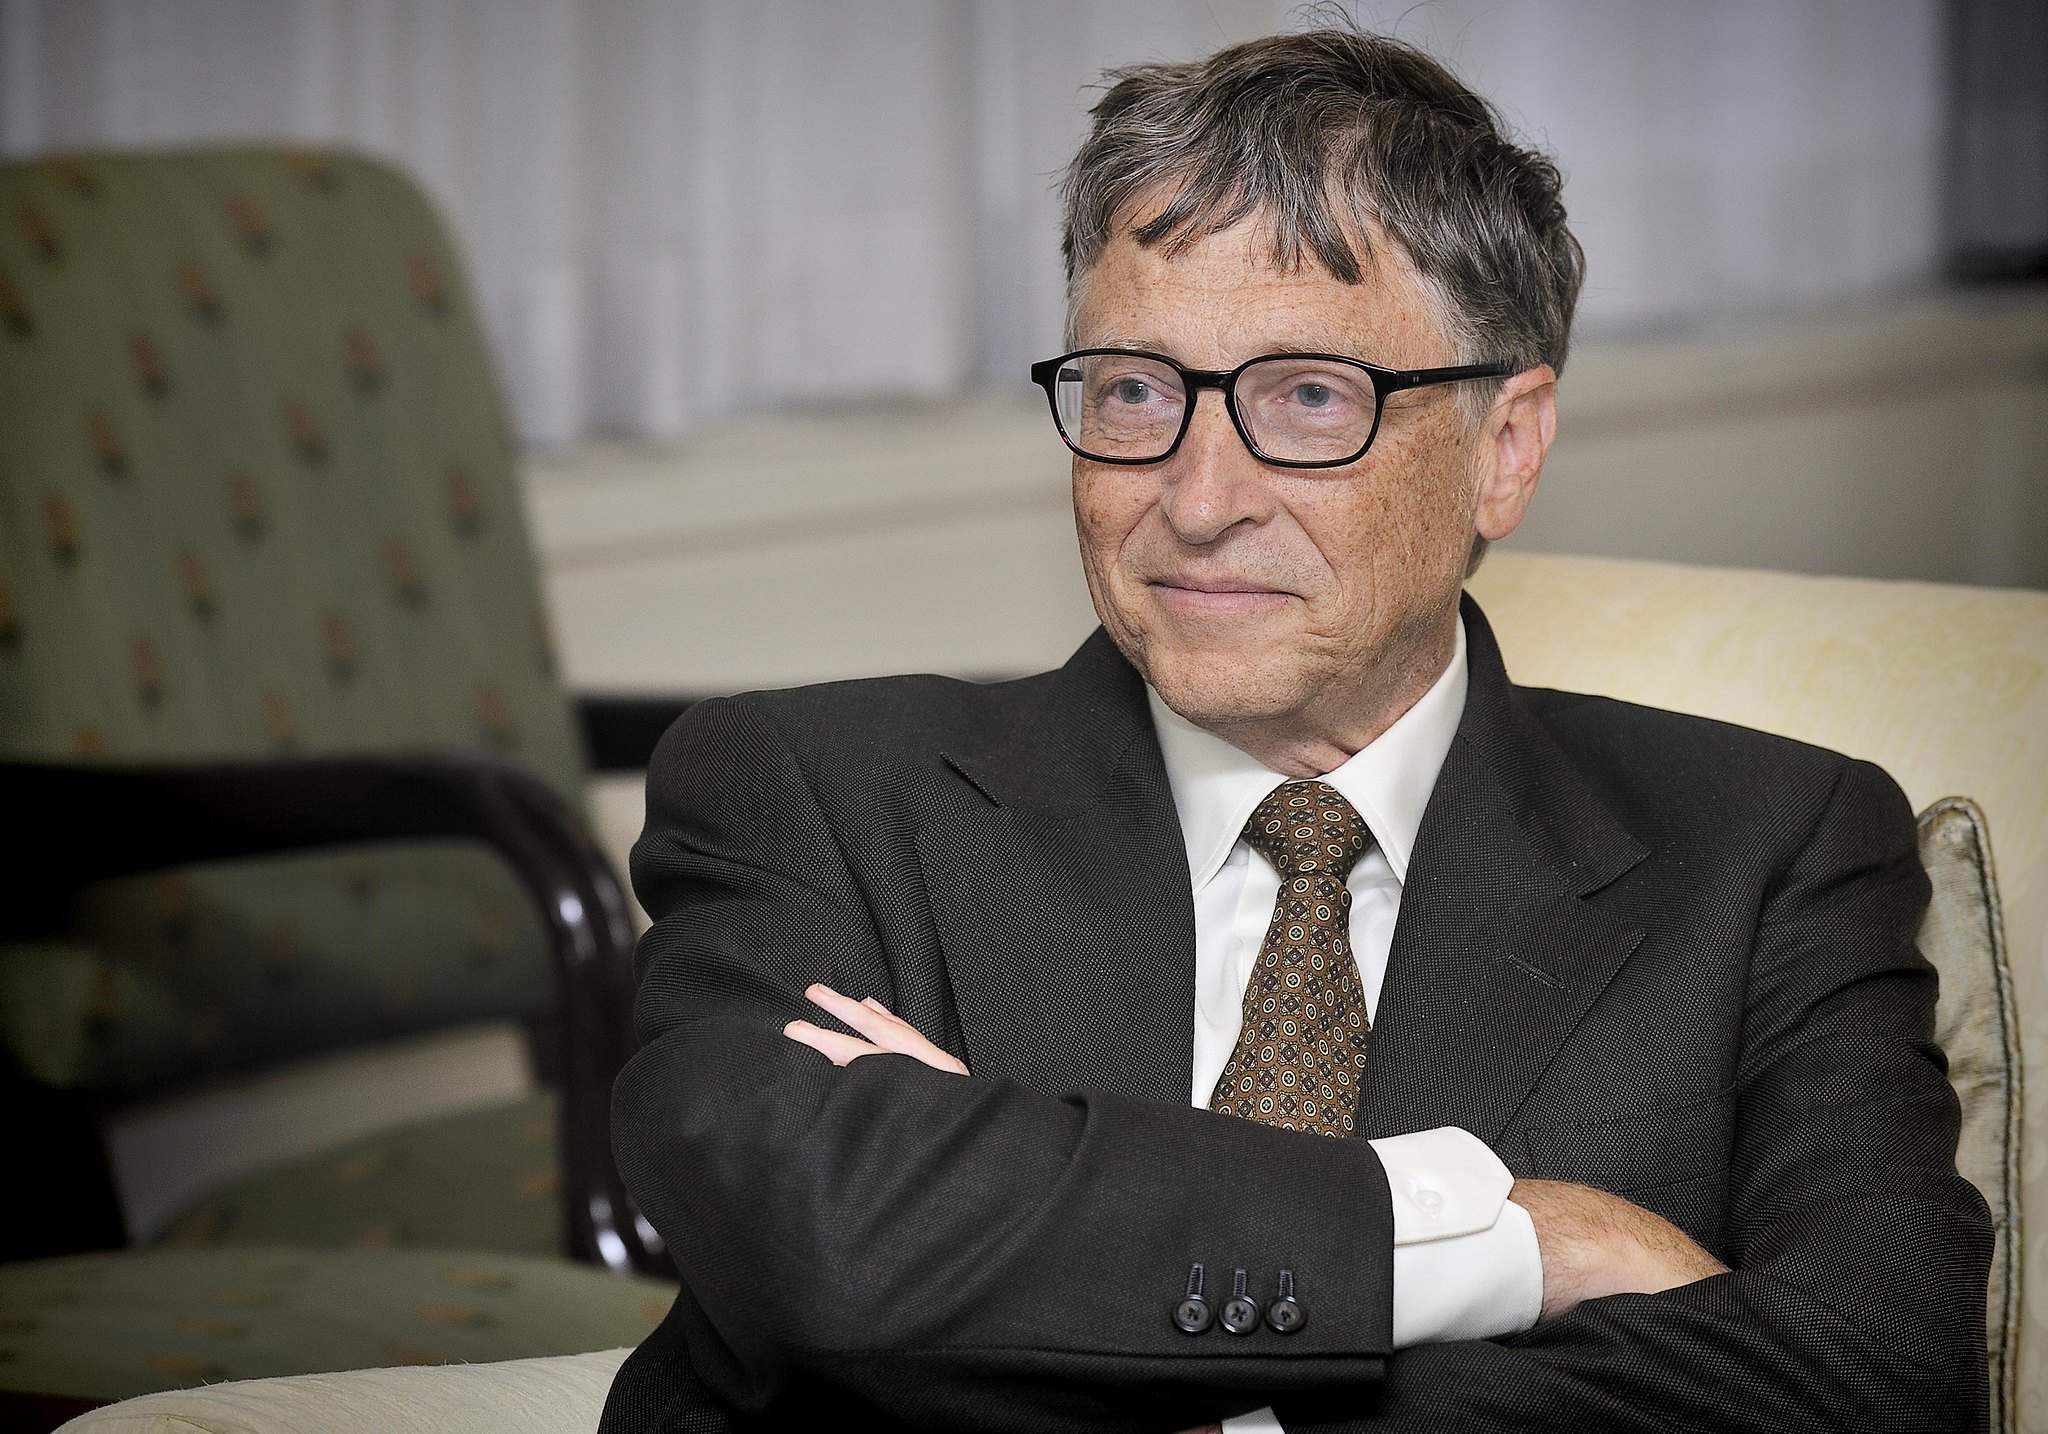 Bill Gates Predicts How Technology Might Change in the Next 4 Decades